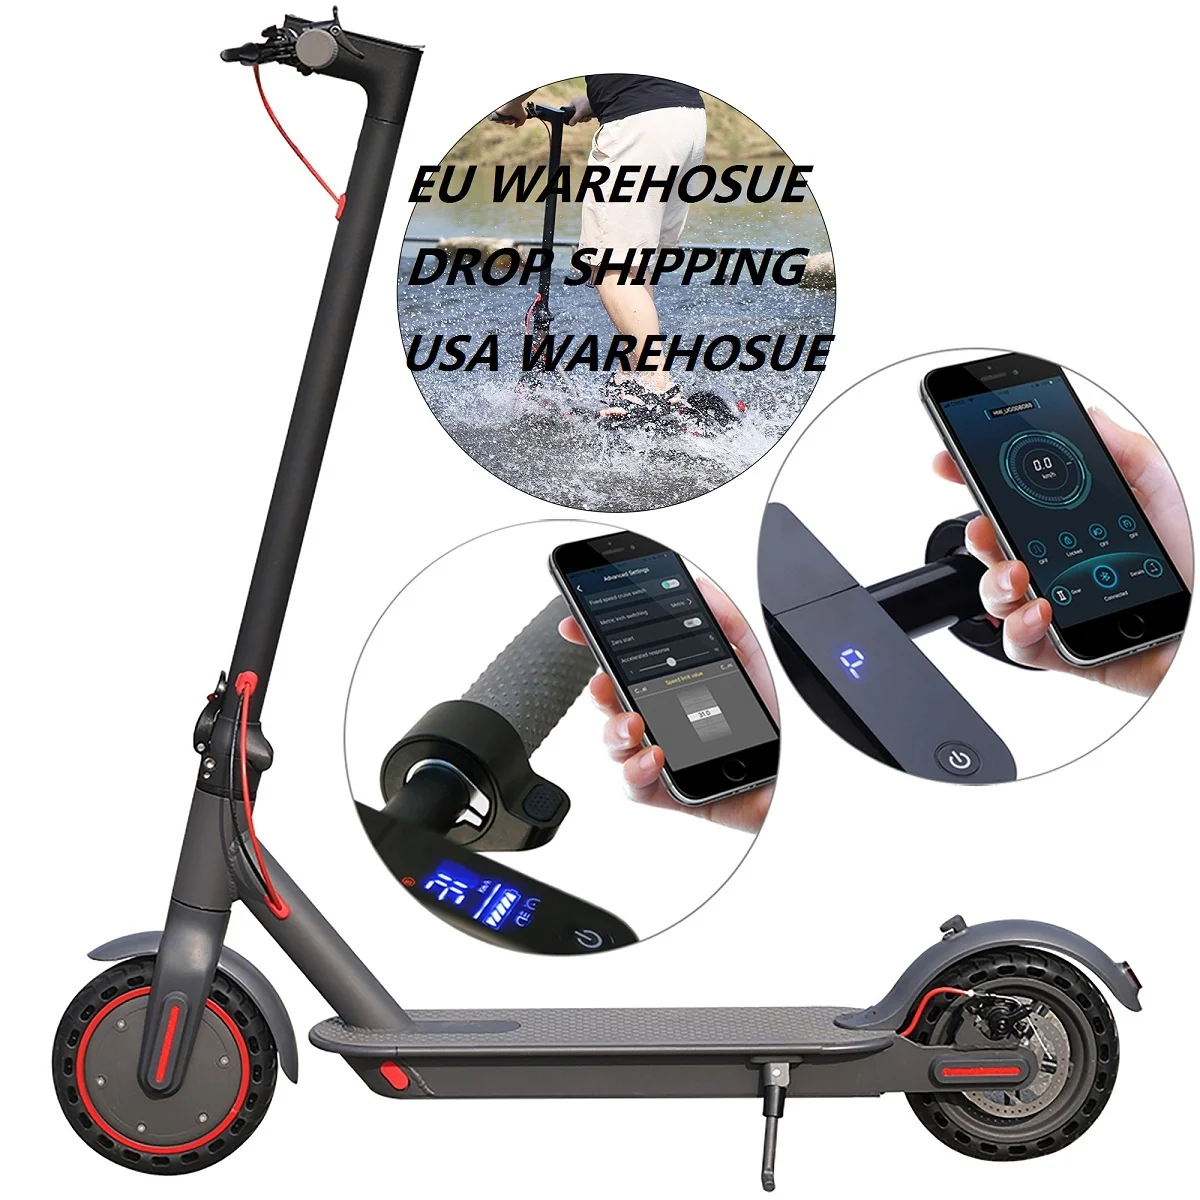 

AOVOPRO UK EU US Warehouse Drop Shipping 350W 10.5Ah Battery 35KM Range M365Pro Foldable Adult Electric Scooter With Smart APP, Black